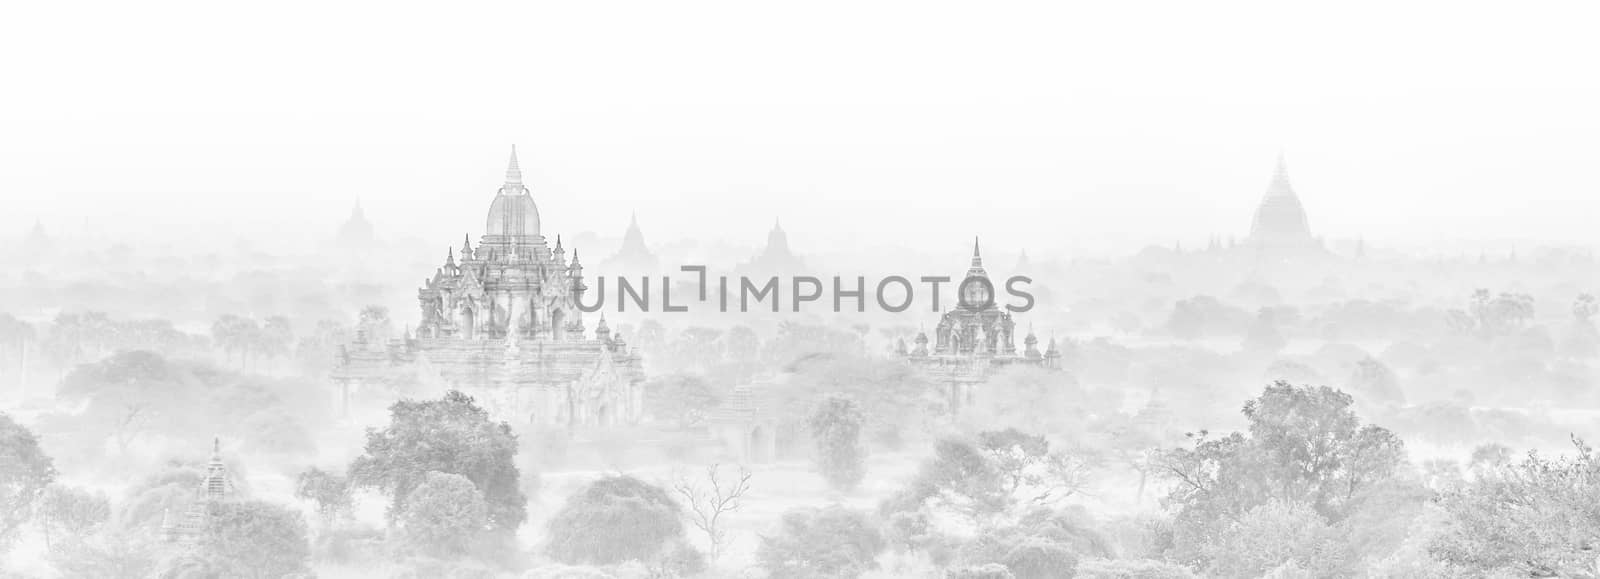 Temples of Bagan an ancient city located in the Mandalay Region of Burma, Myanmar, Asia. High key black and white image.